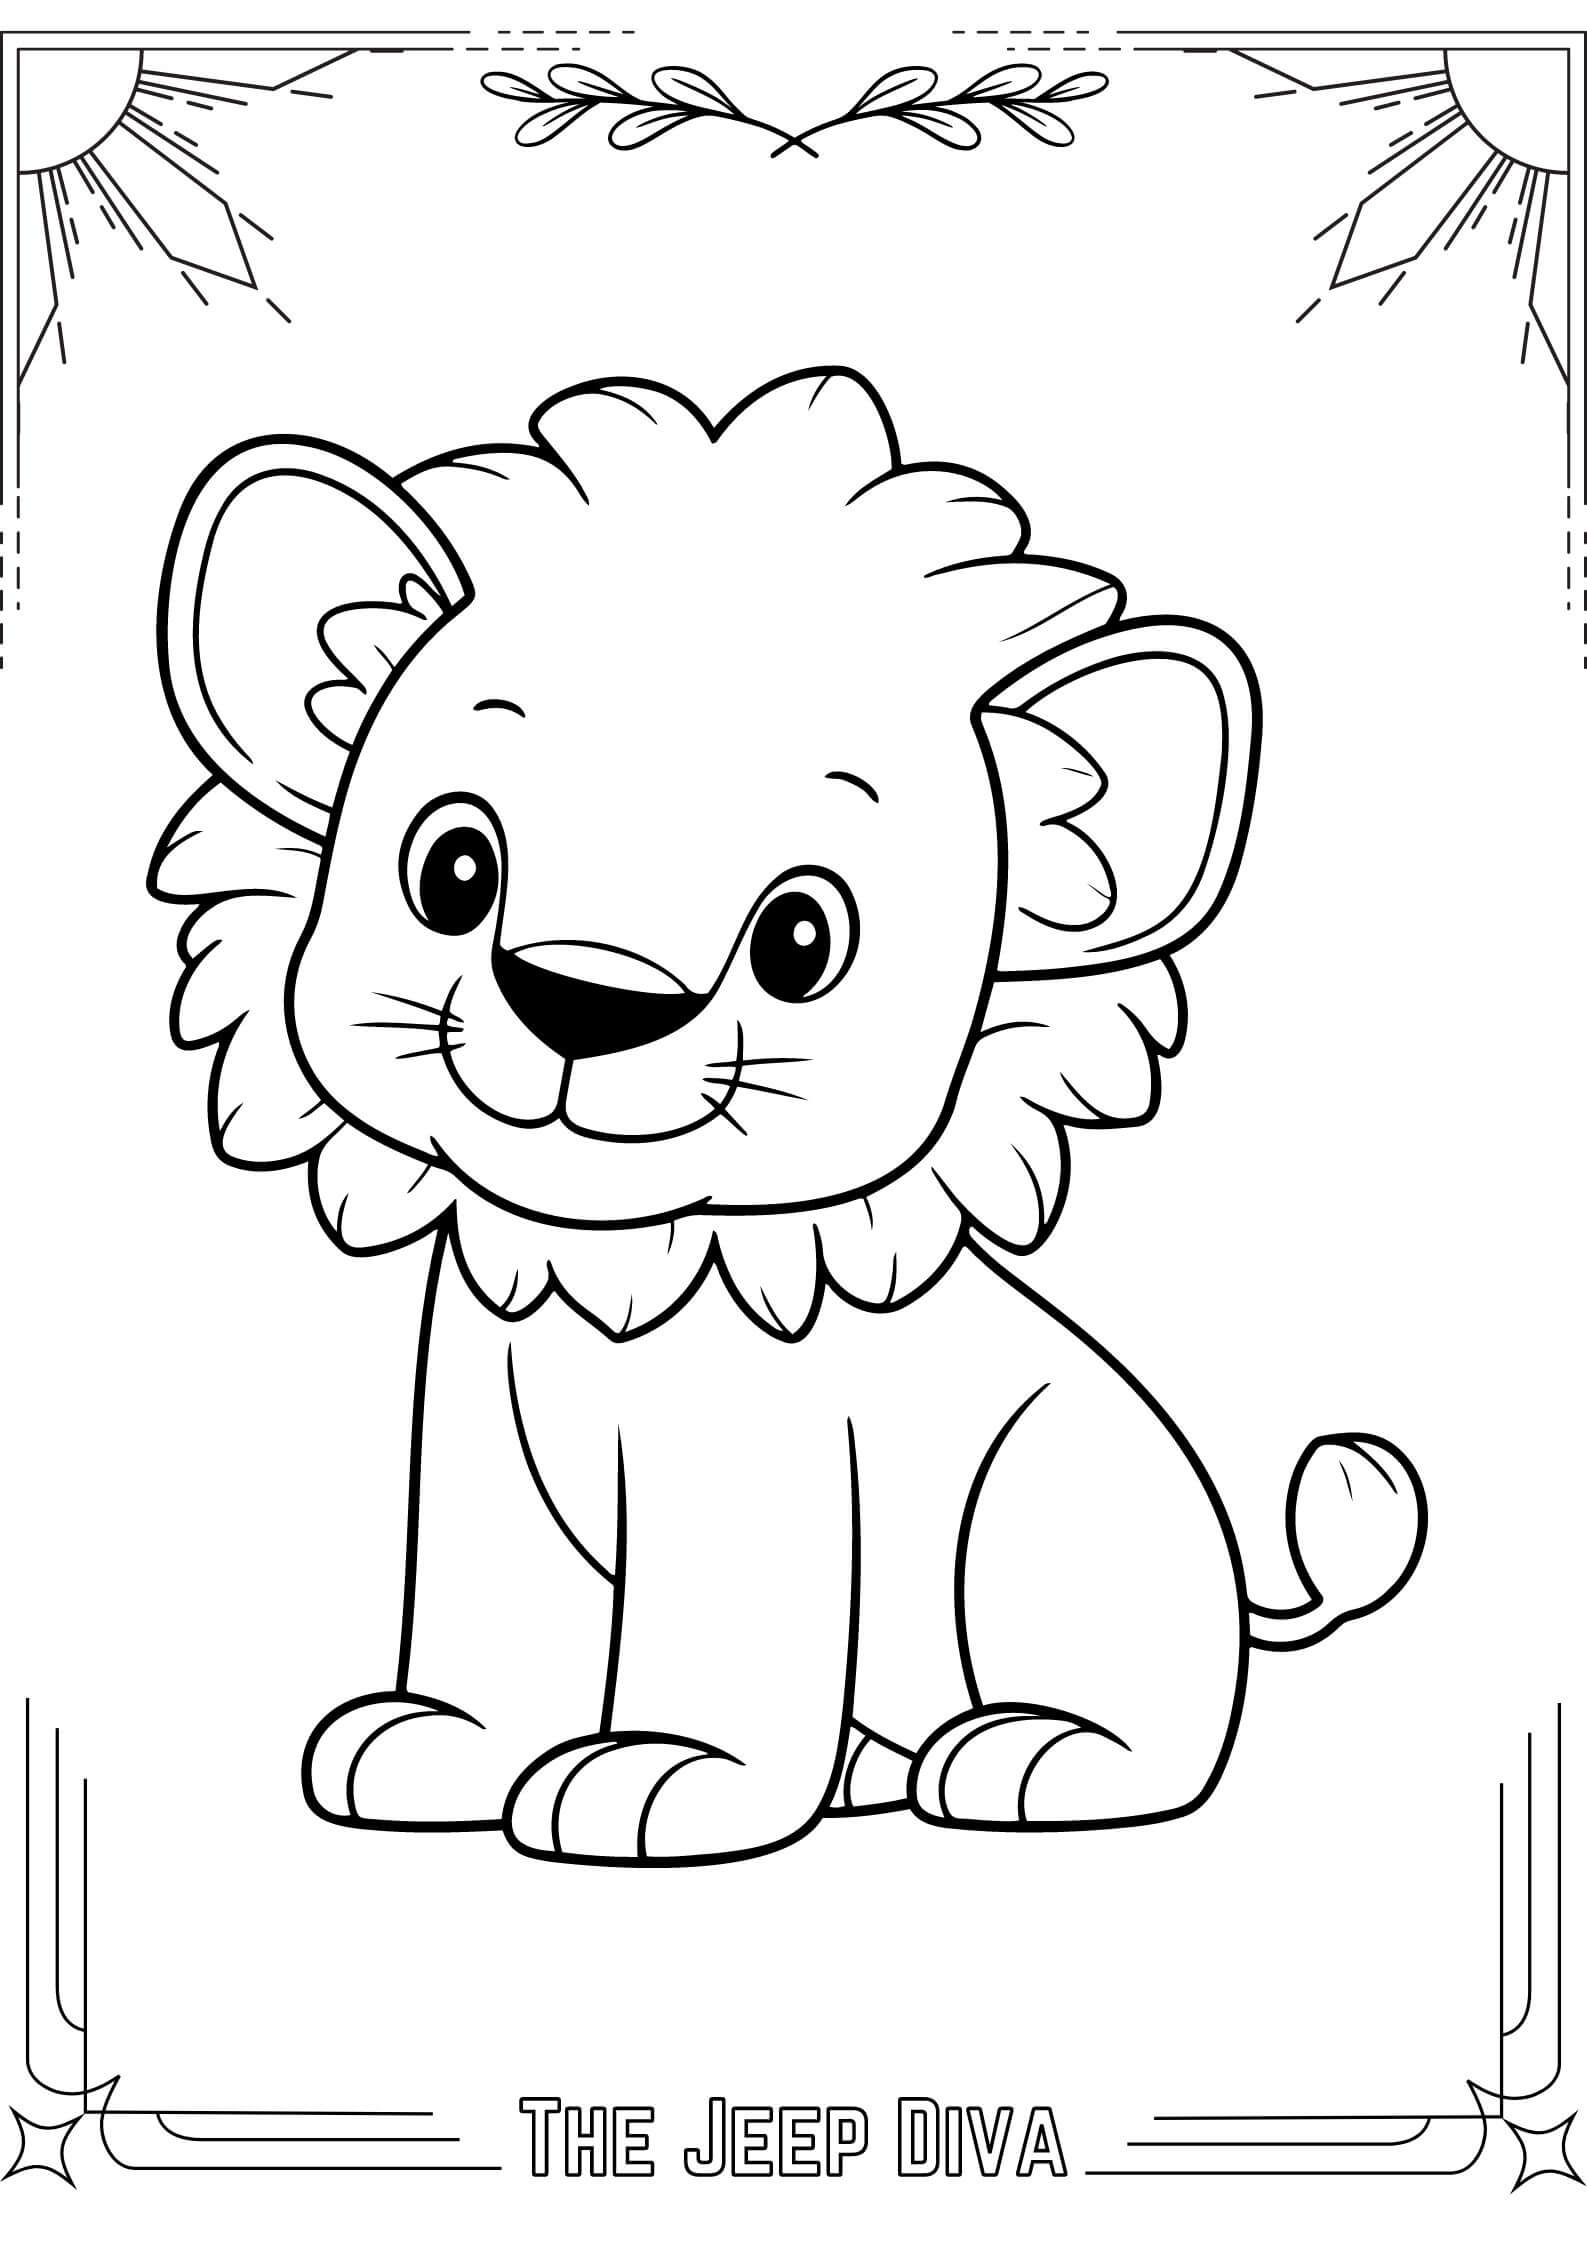 The Jeep Diva Coloring Page 12 Lion